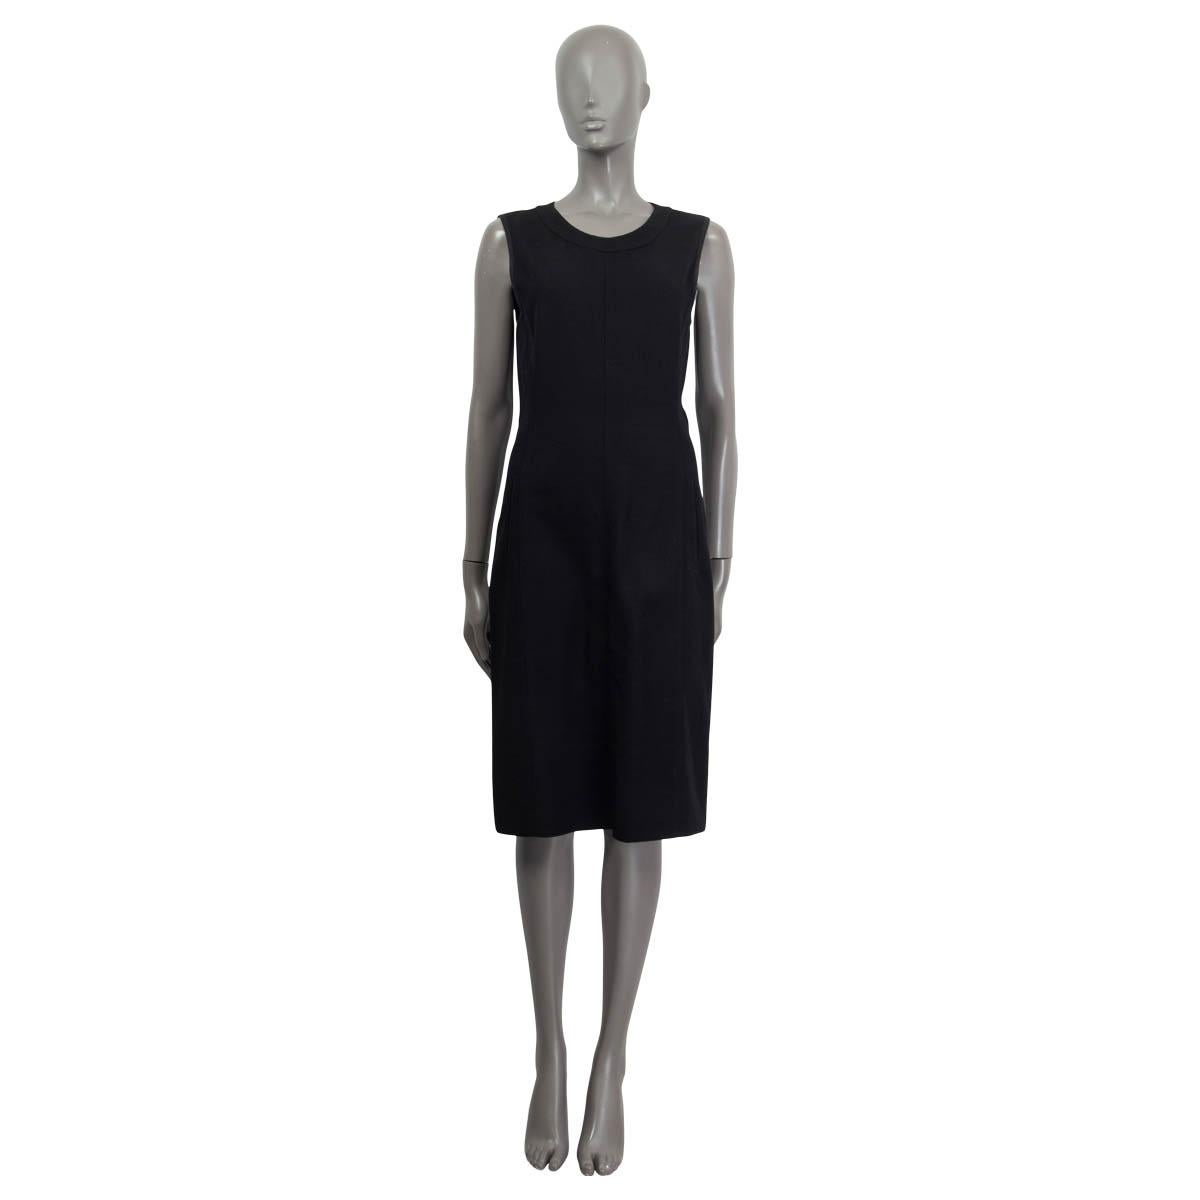 100% authentic Narcisco Rodriguez sleeveless sheath dress in black wool (100%) and silk (100%) lining. Opens with a zipper on the back and has two faux slit pockets on the side. Knee-length with a small slit in the side. Has been worn and is in